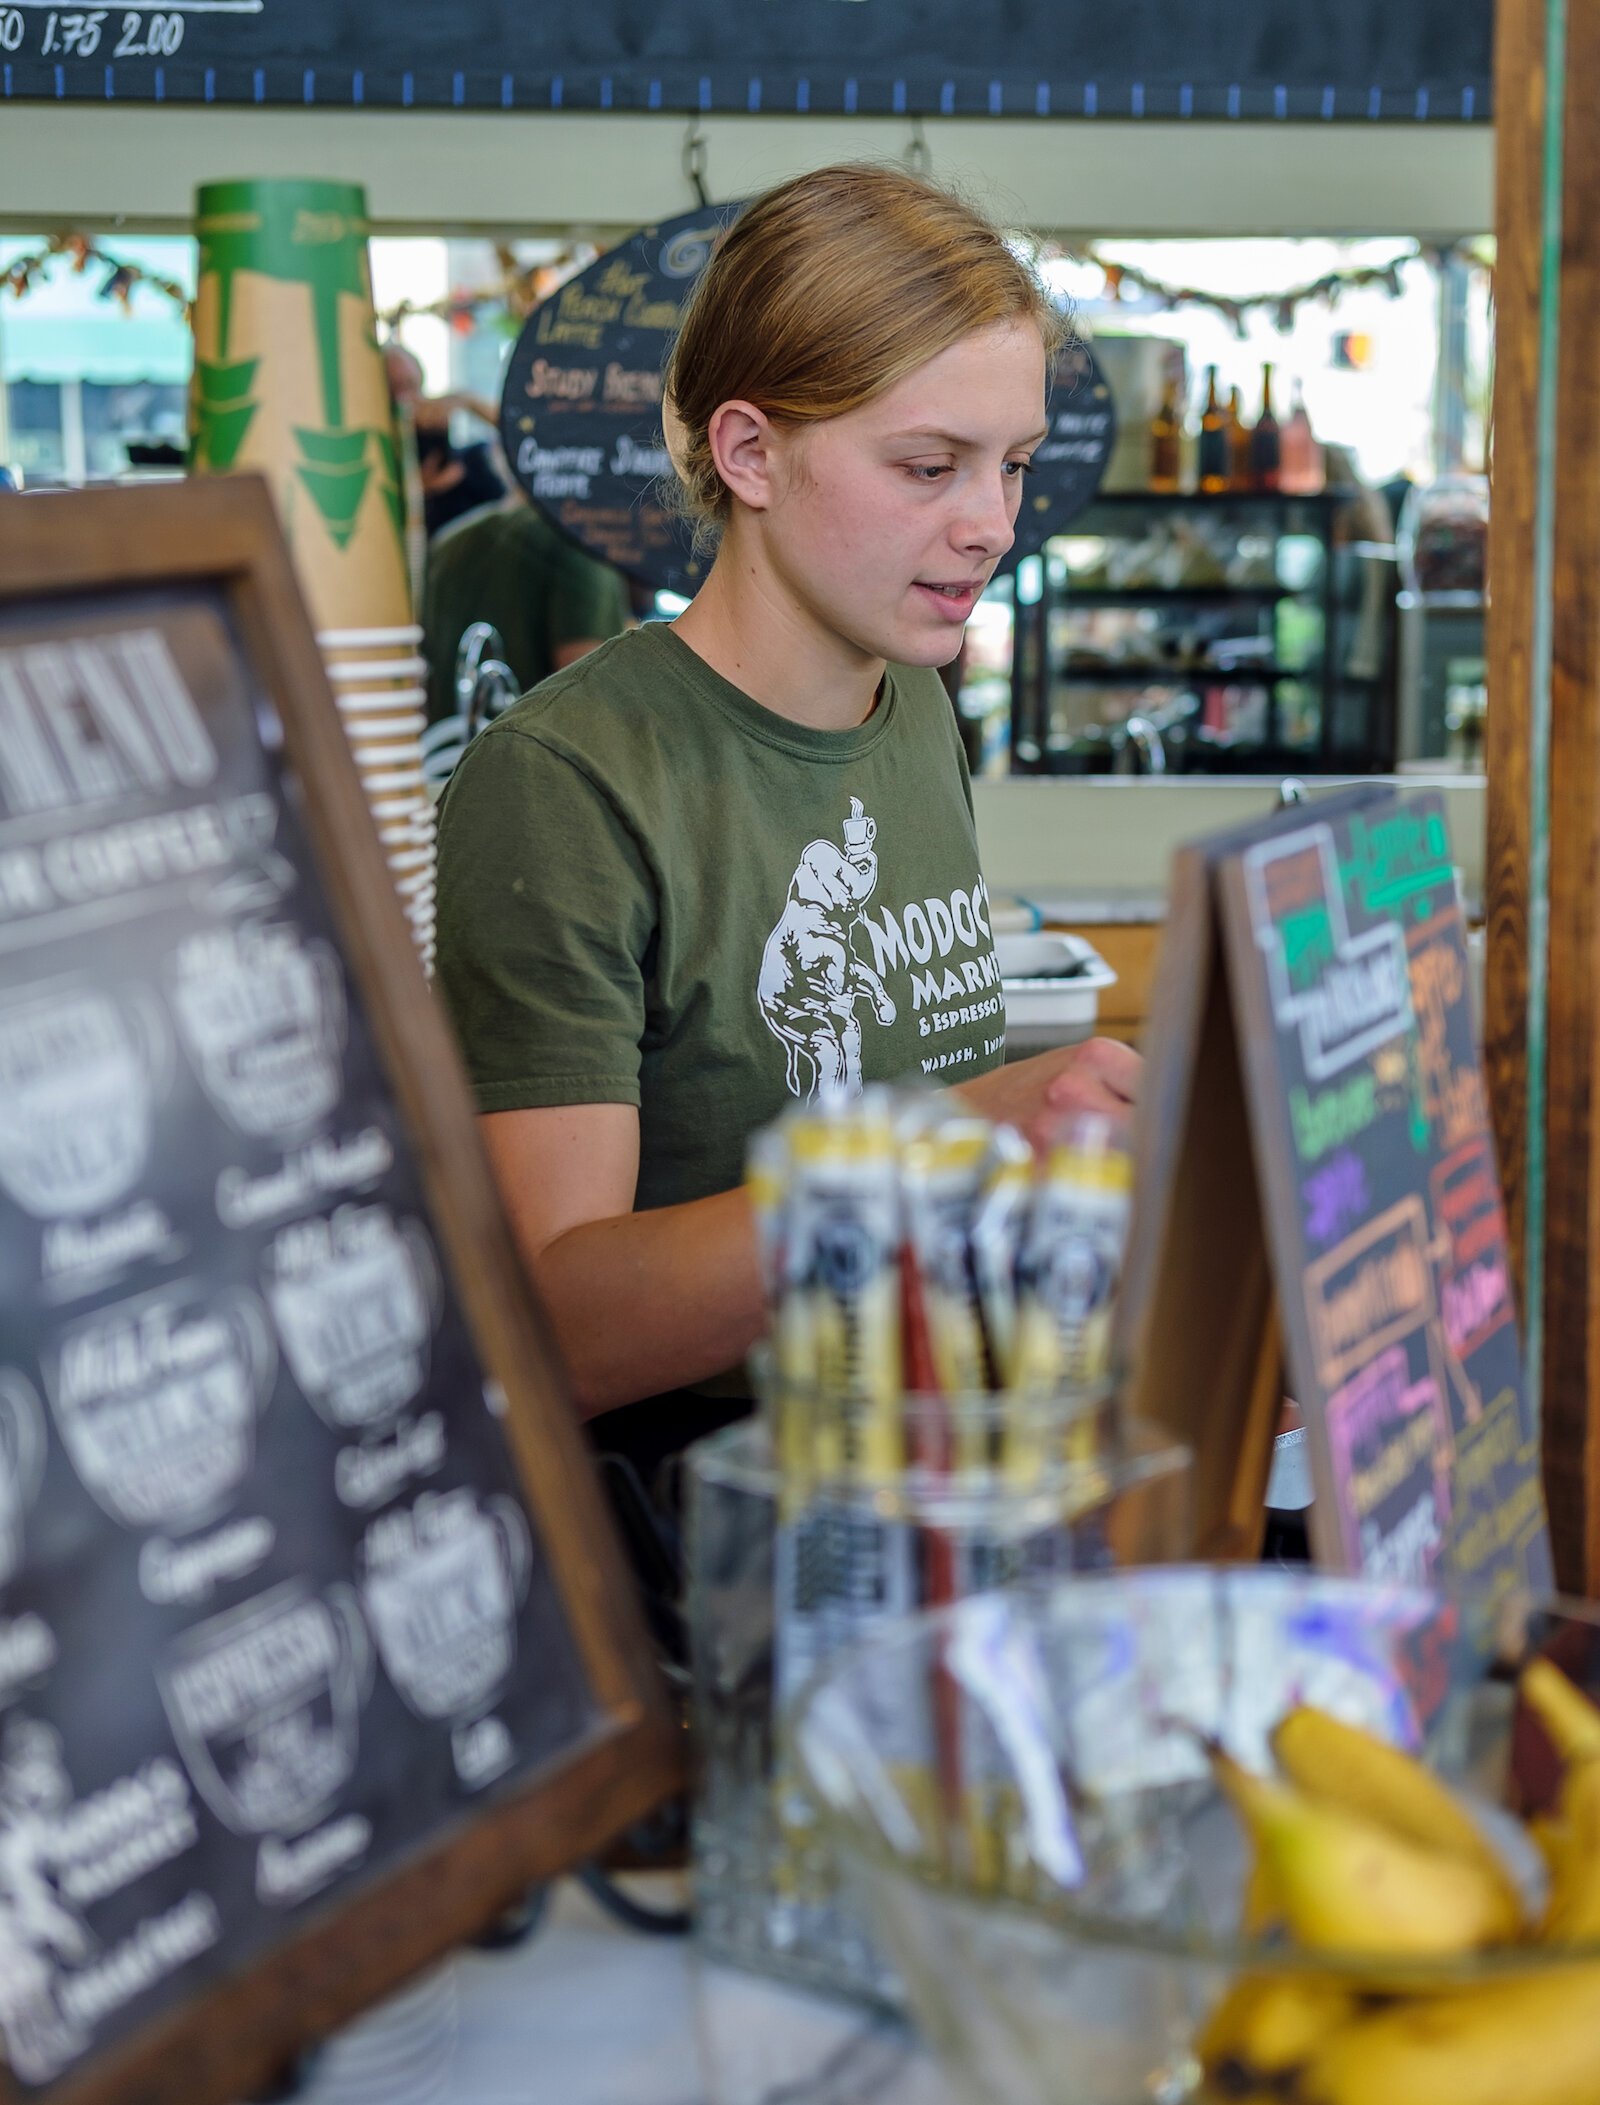 Julia Weeks is a barista at Modoc's Market in Downtown Wabash.